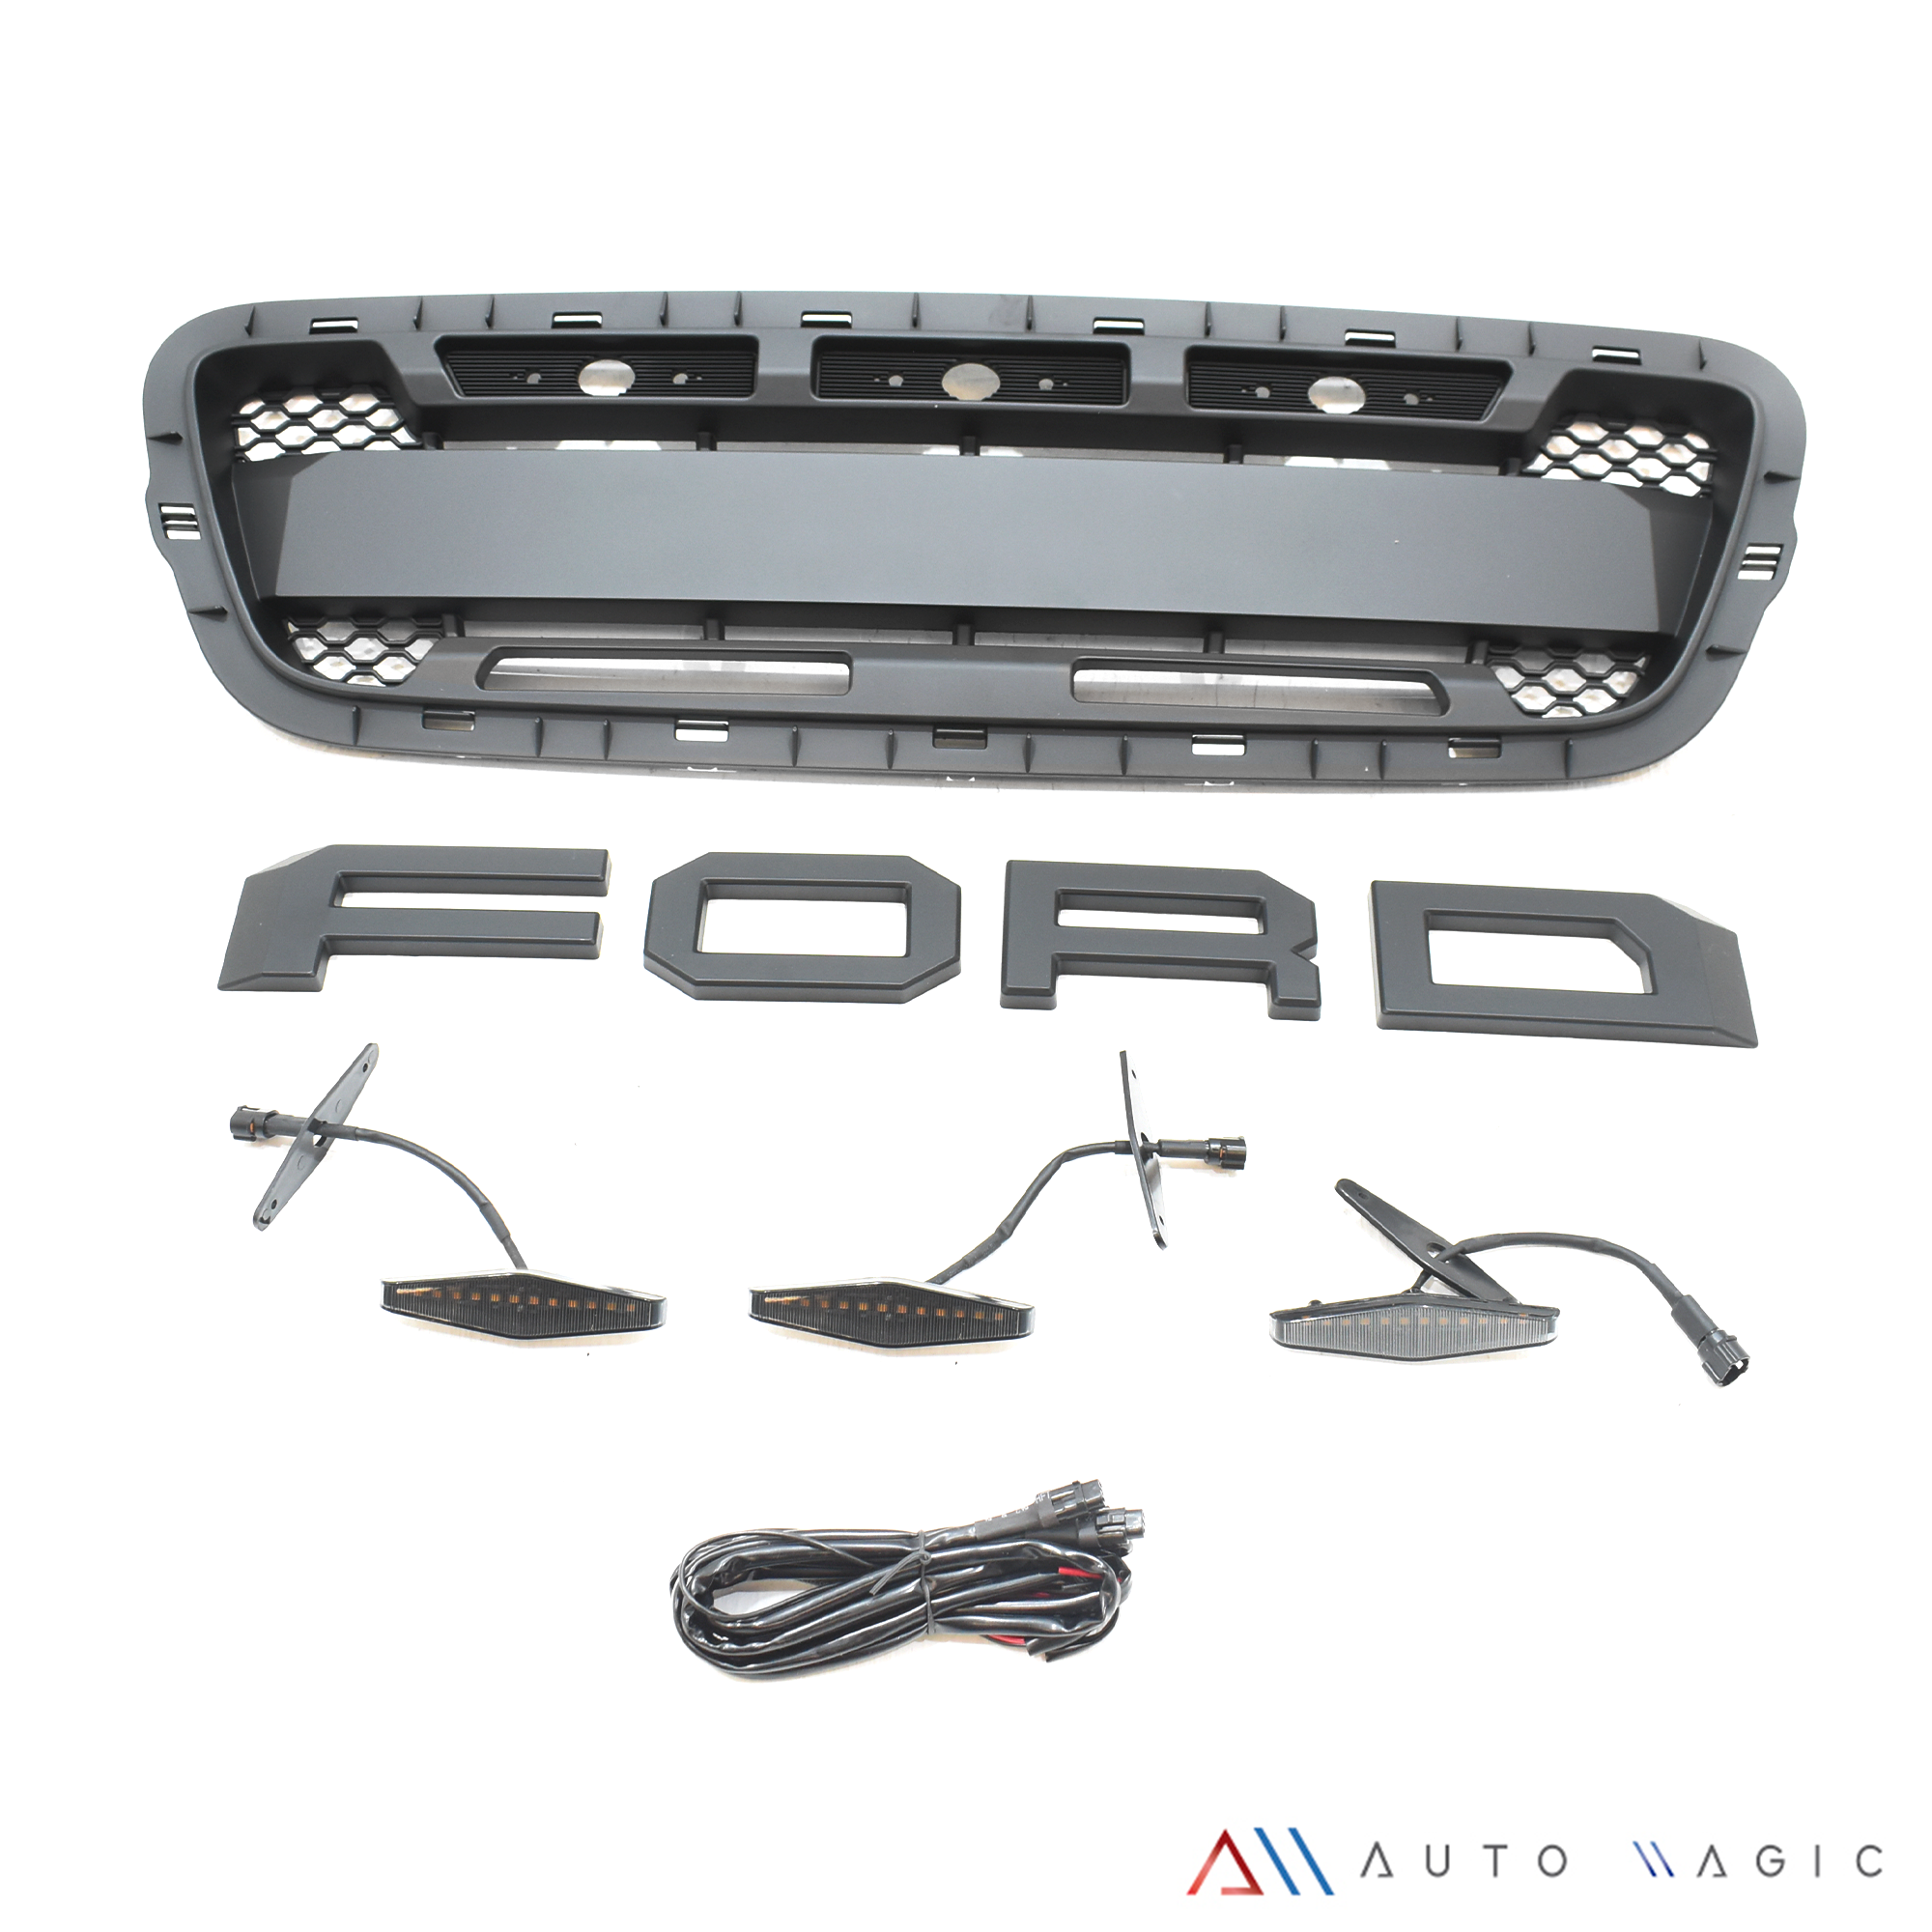 Parrilla Ford Ranger Tipo Raptor 2001 2002 2003 Con Leds